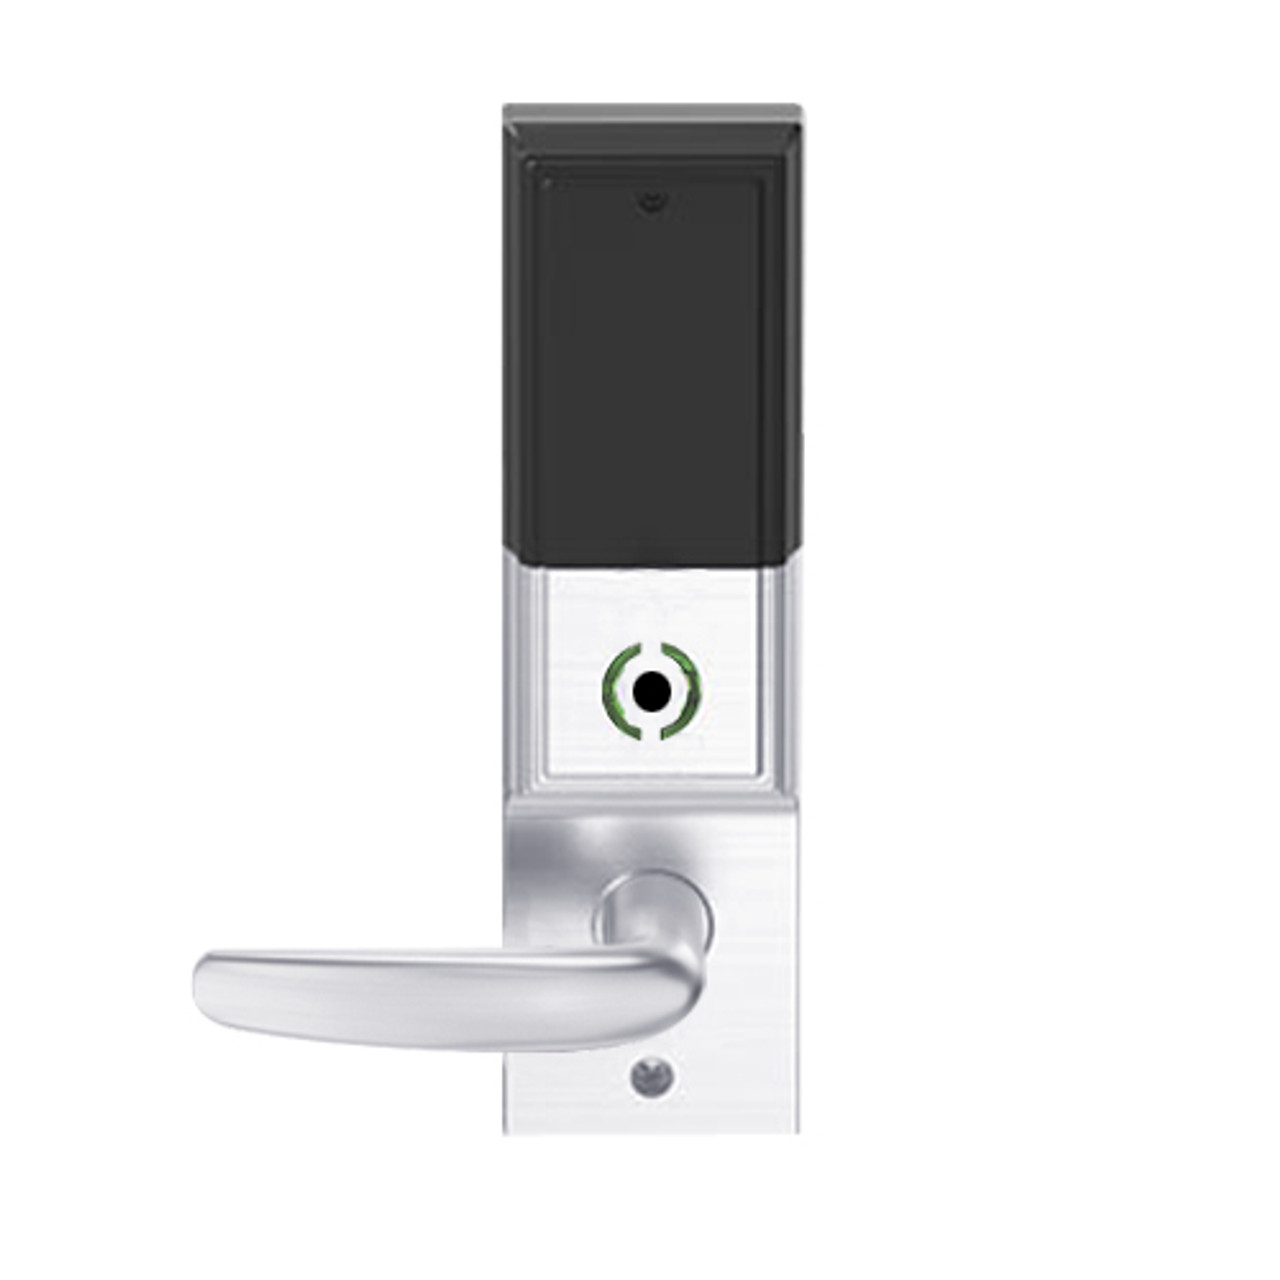 LEMB-ADD-P-07-625 Schlage Privacy/Office Wireless Addison Mortise Lock with Push Button, LED and Athens Lever in Bright Chrome